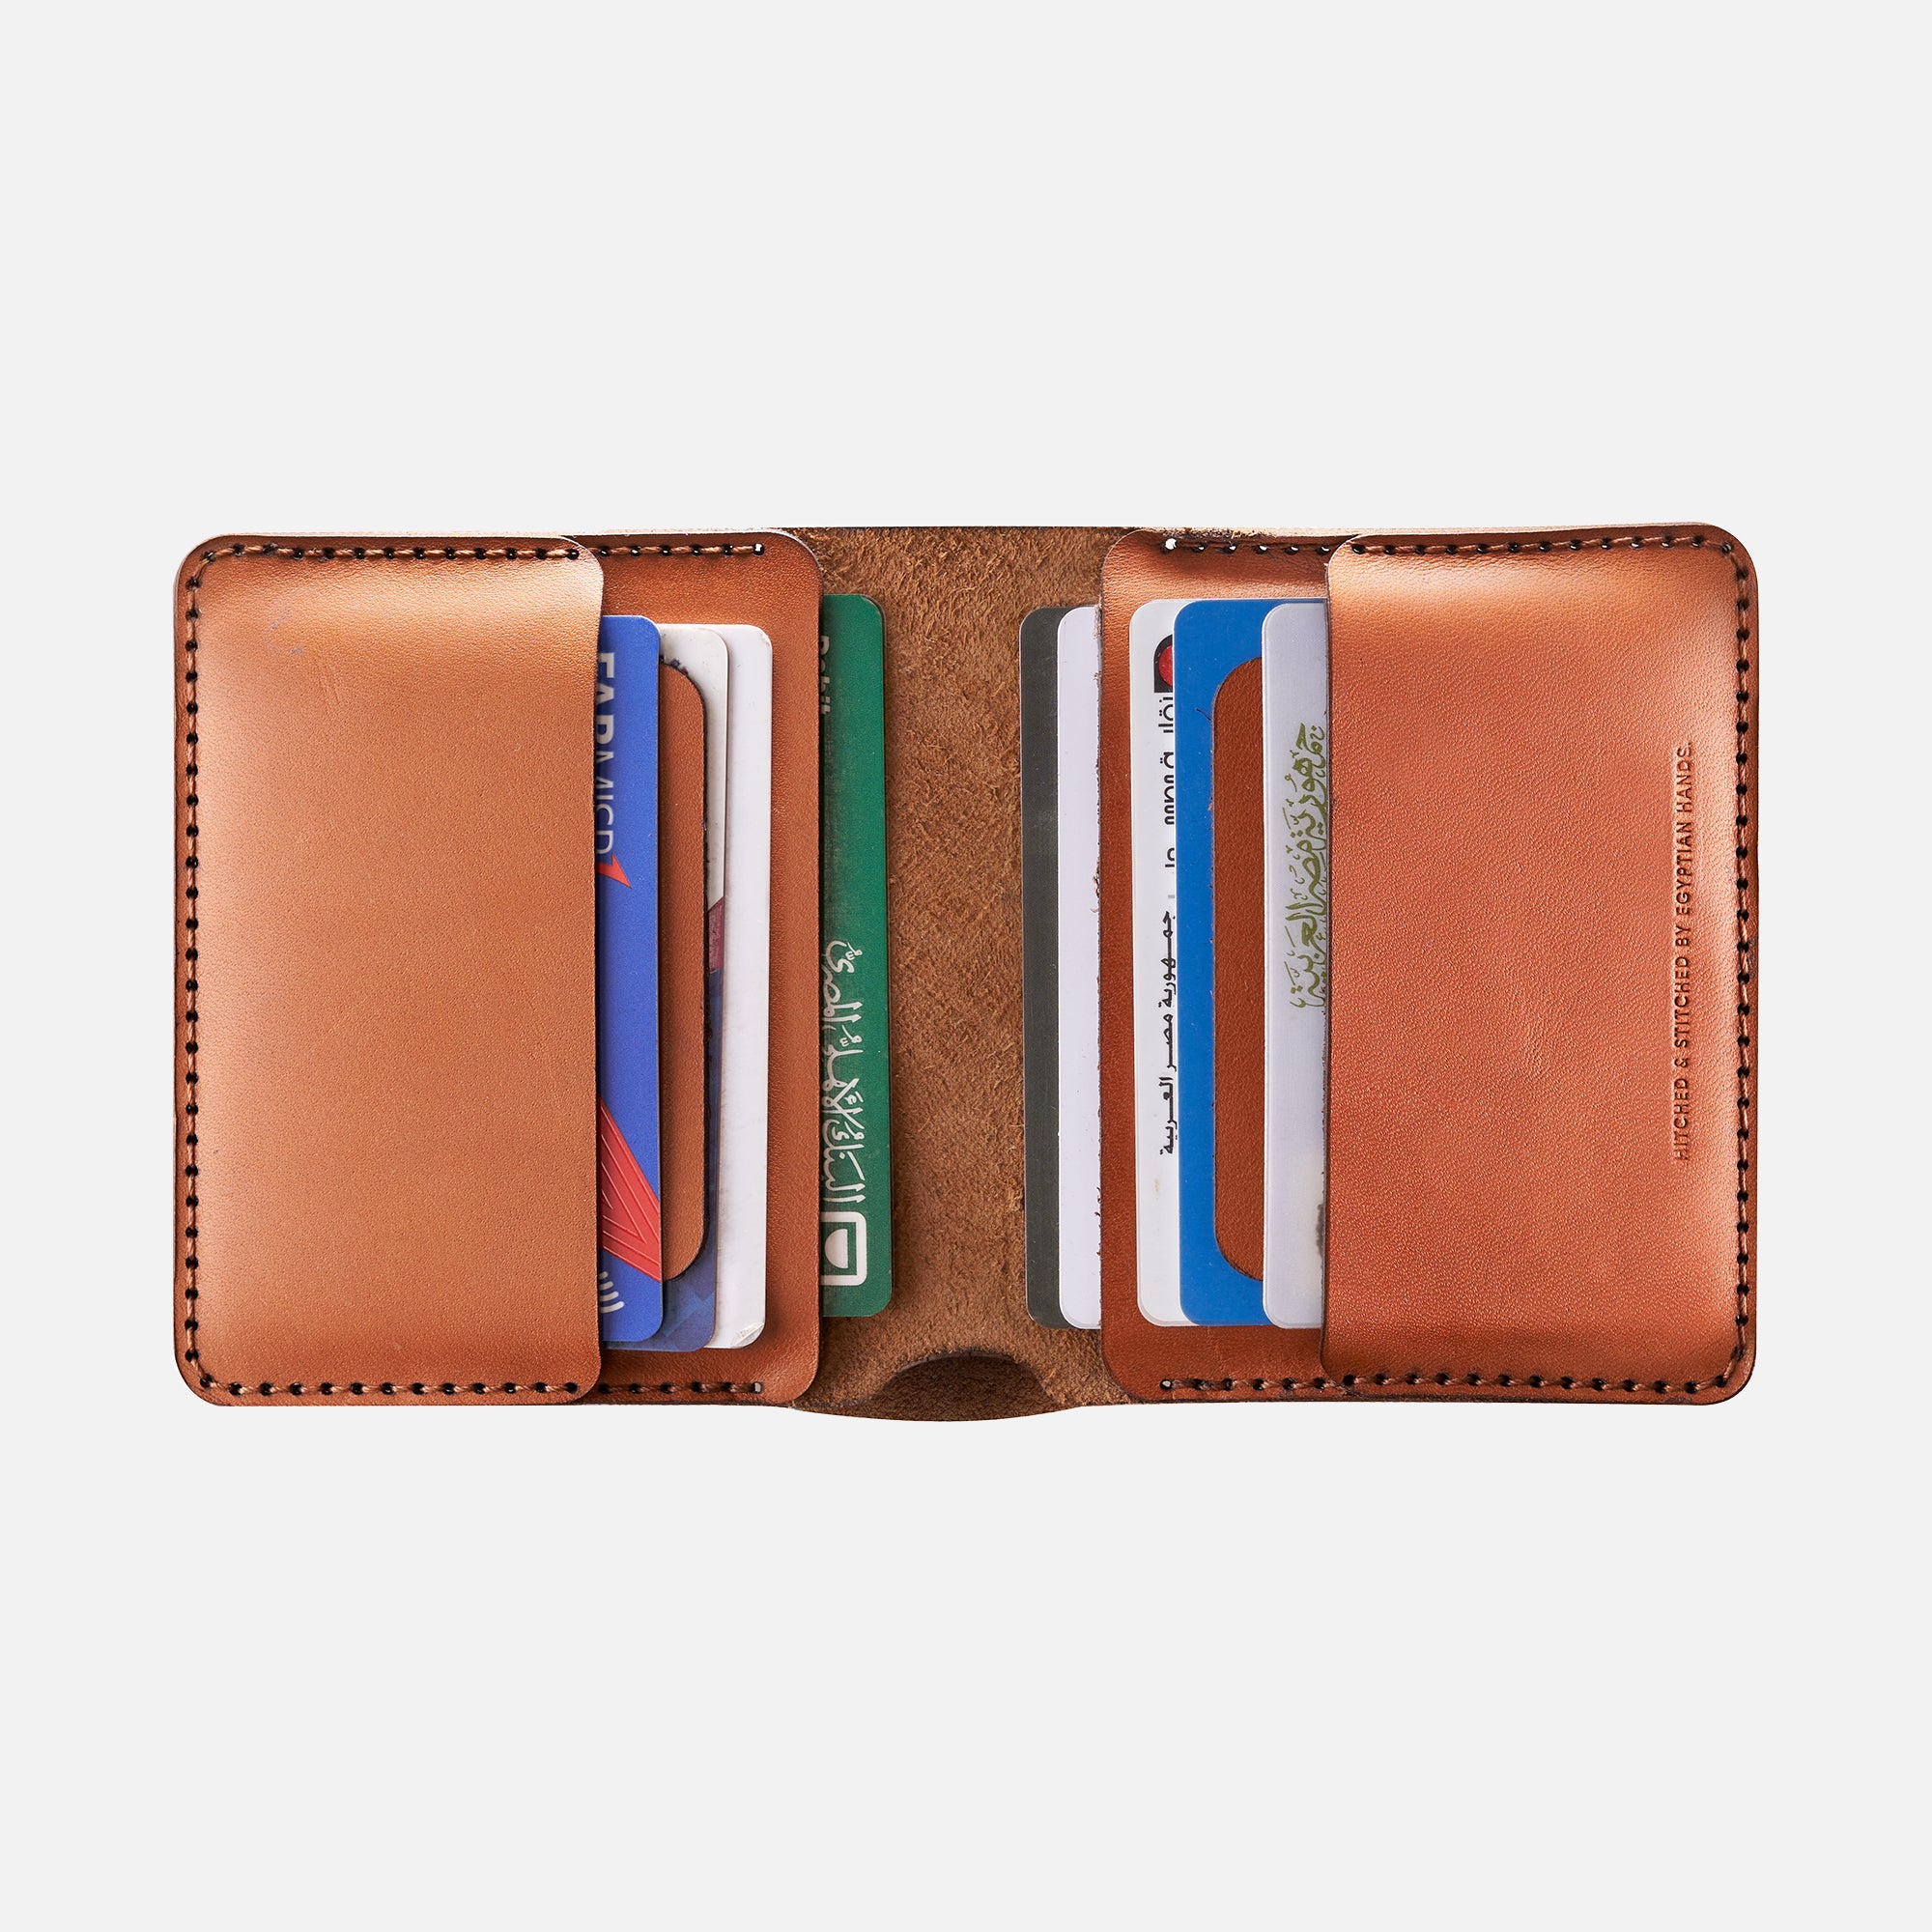 Brown leather bifold wallet with multiple credit cards inside on white background.